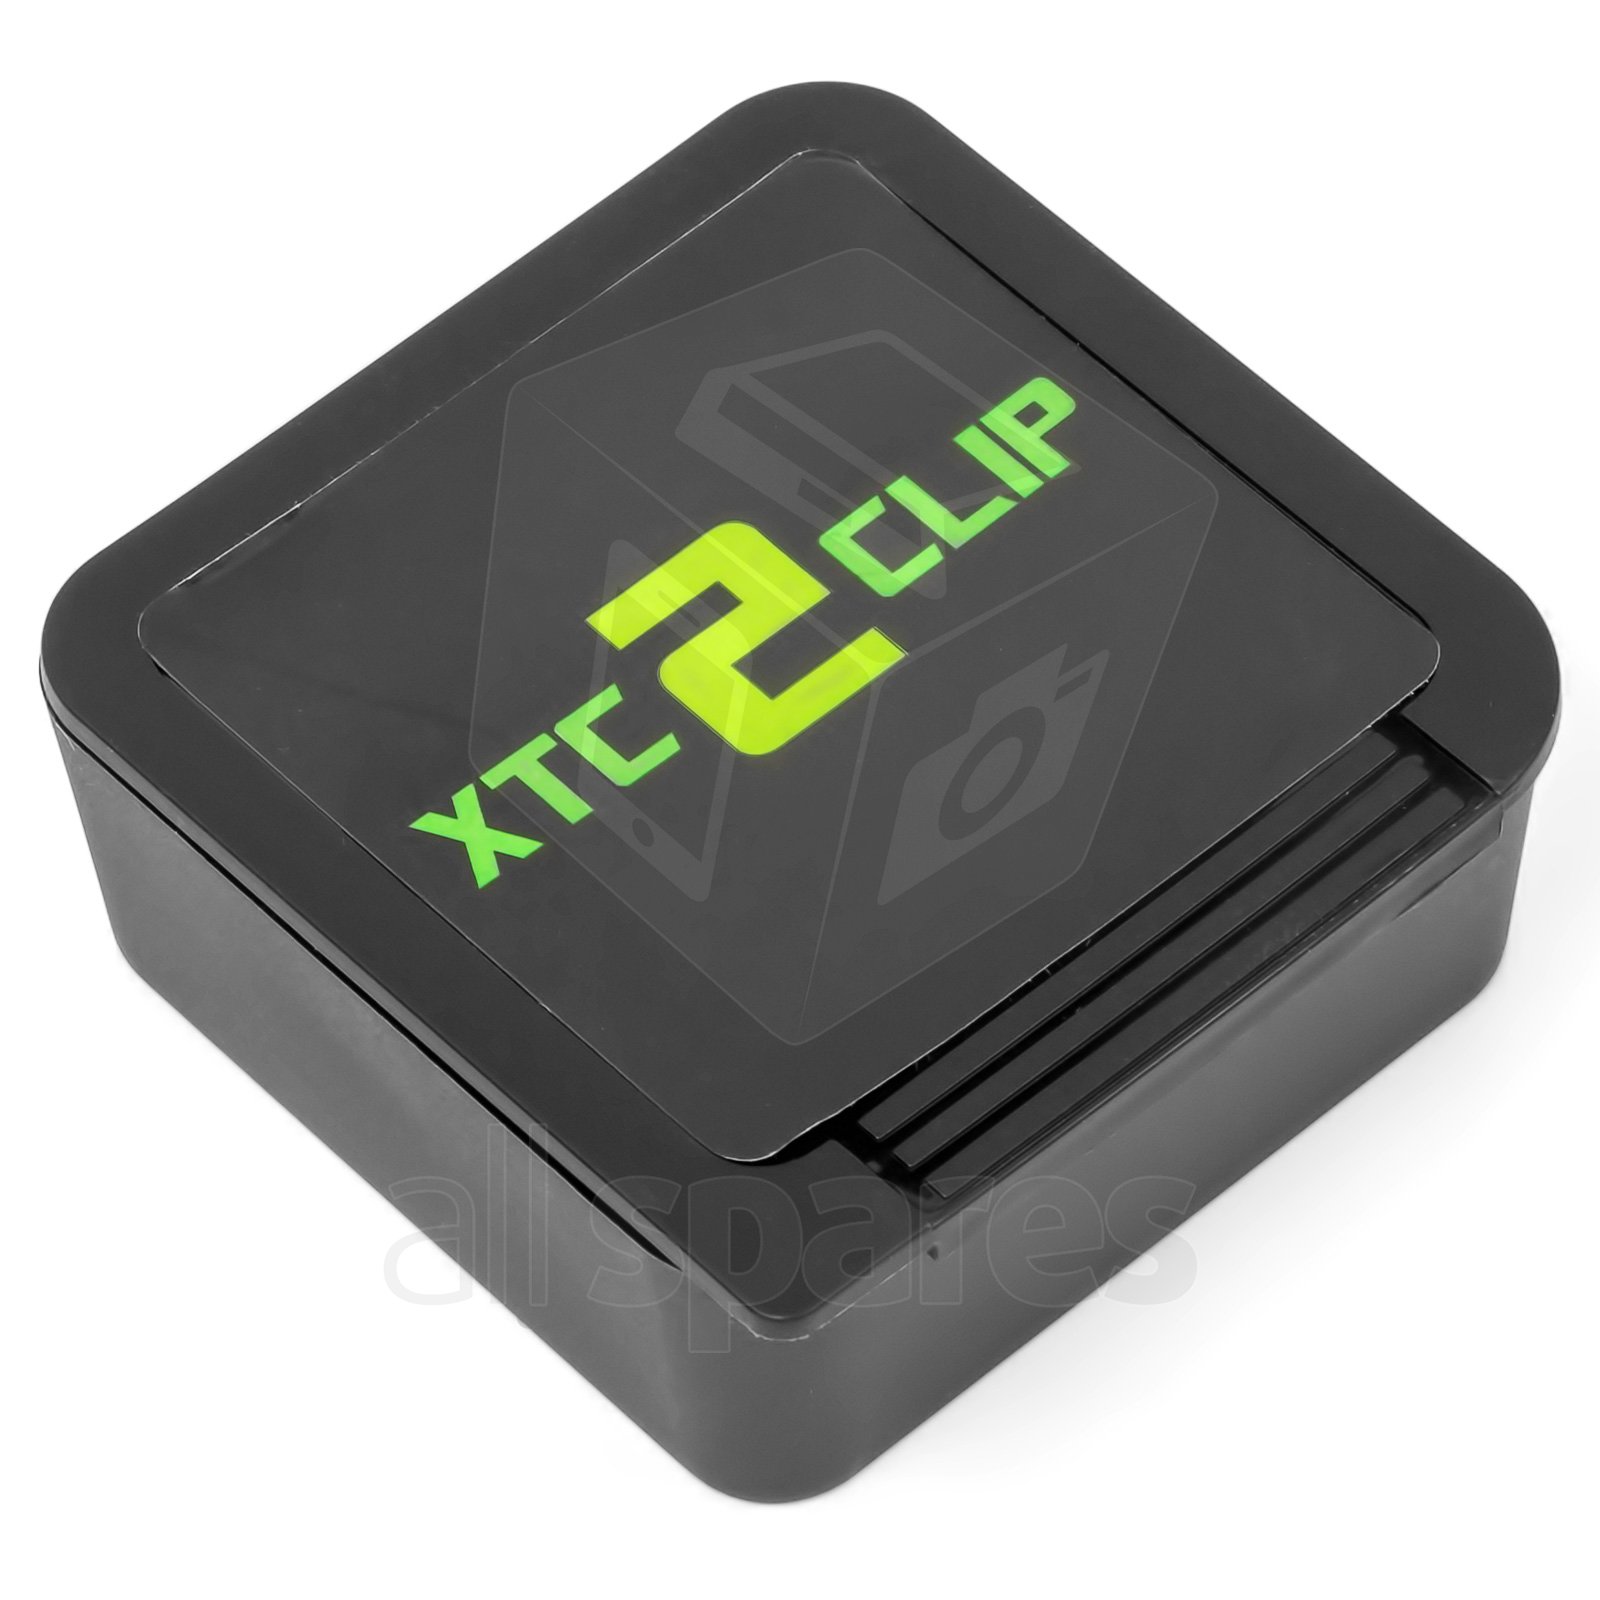 xtc 2 clip tool without box